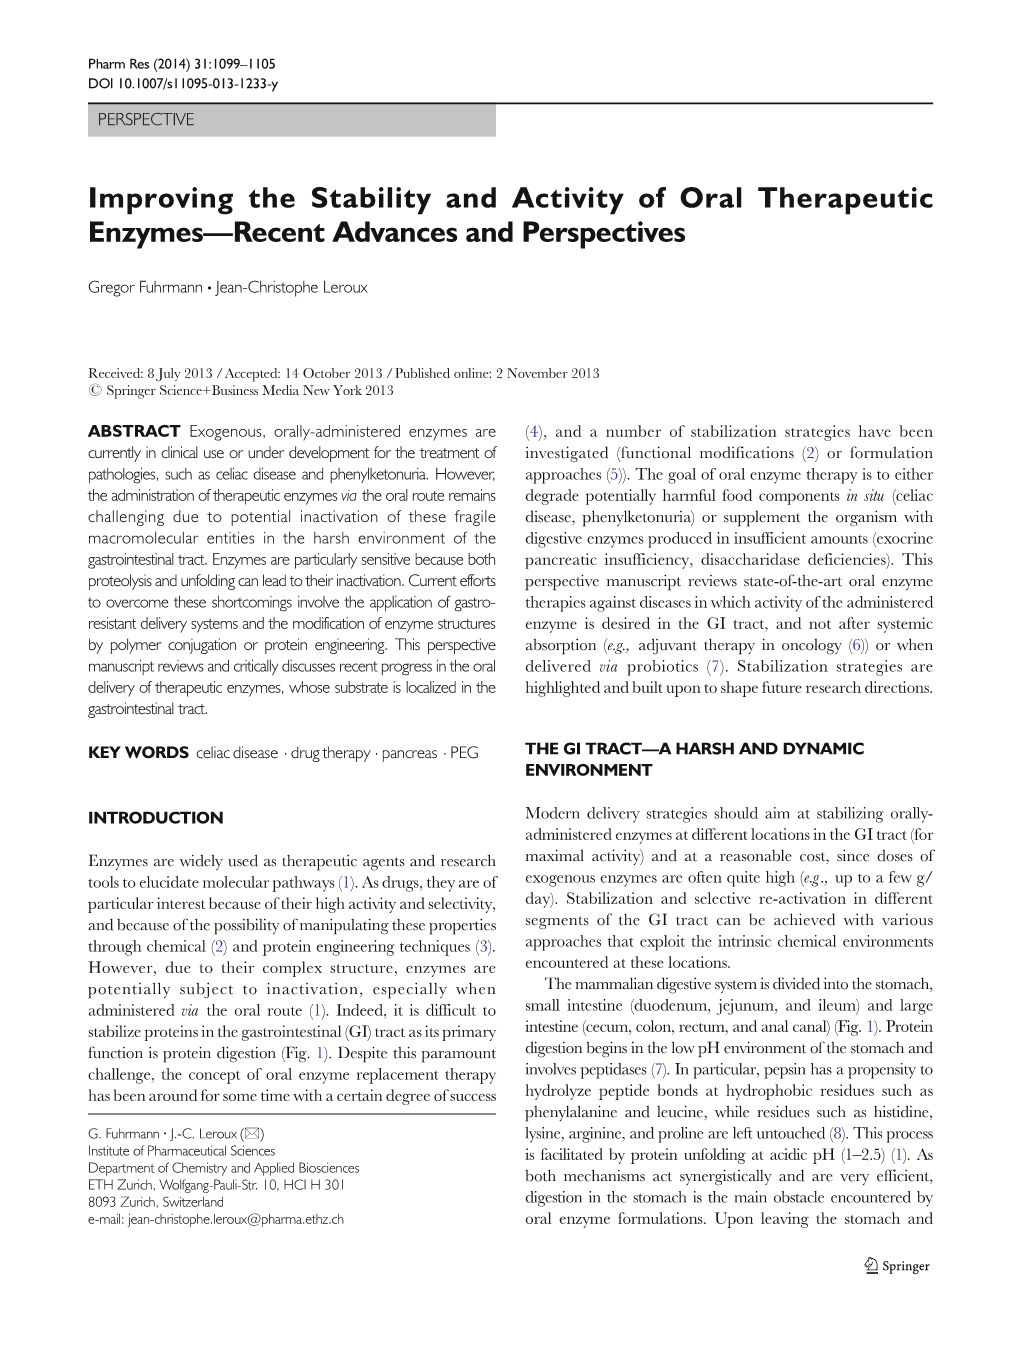 Improving the Stability and Activity of Oral Therapeutic Enzymes—Recent Advances and Perspectives